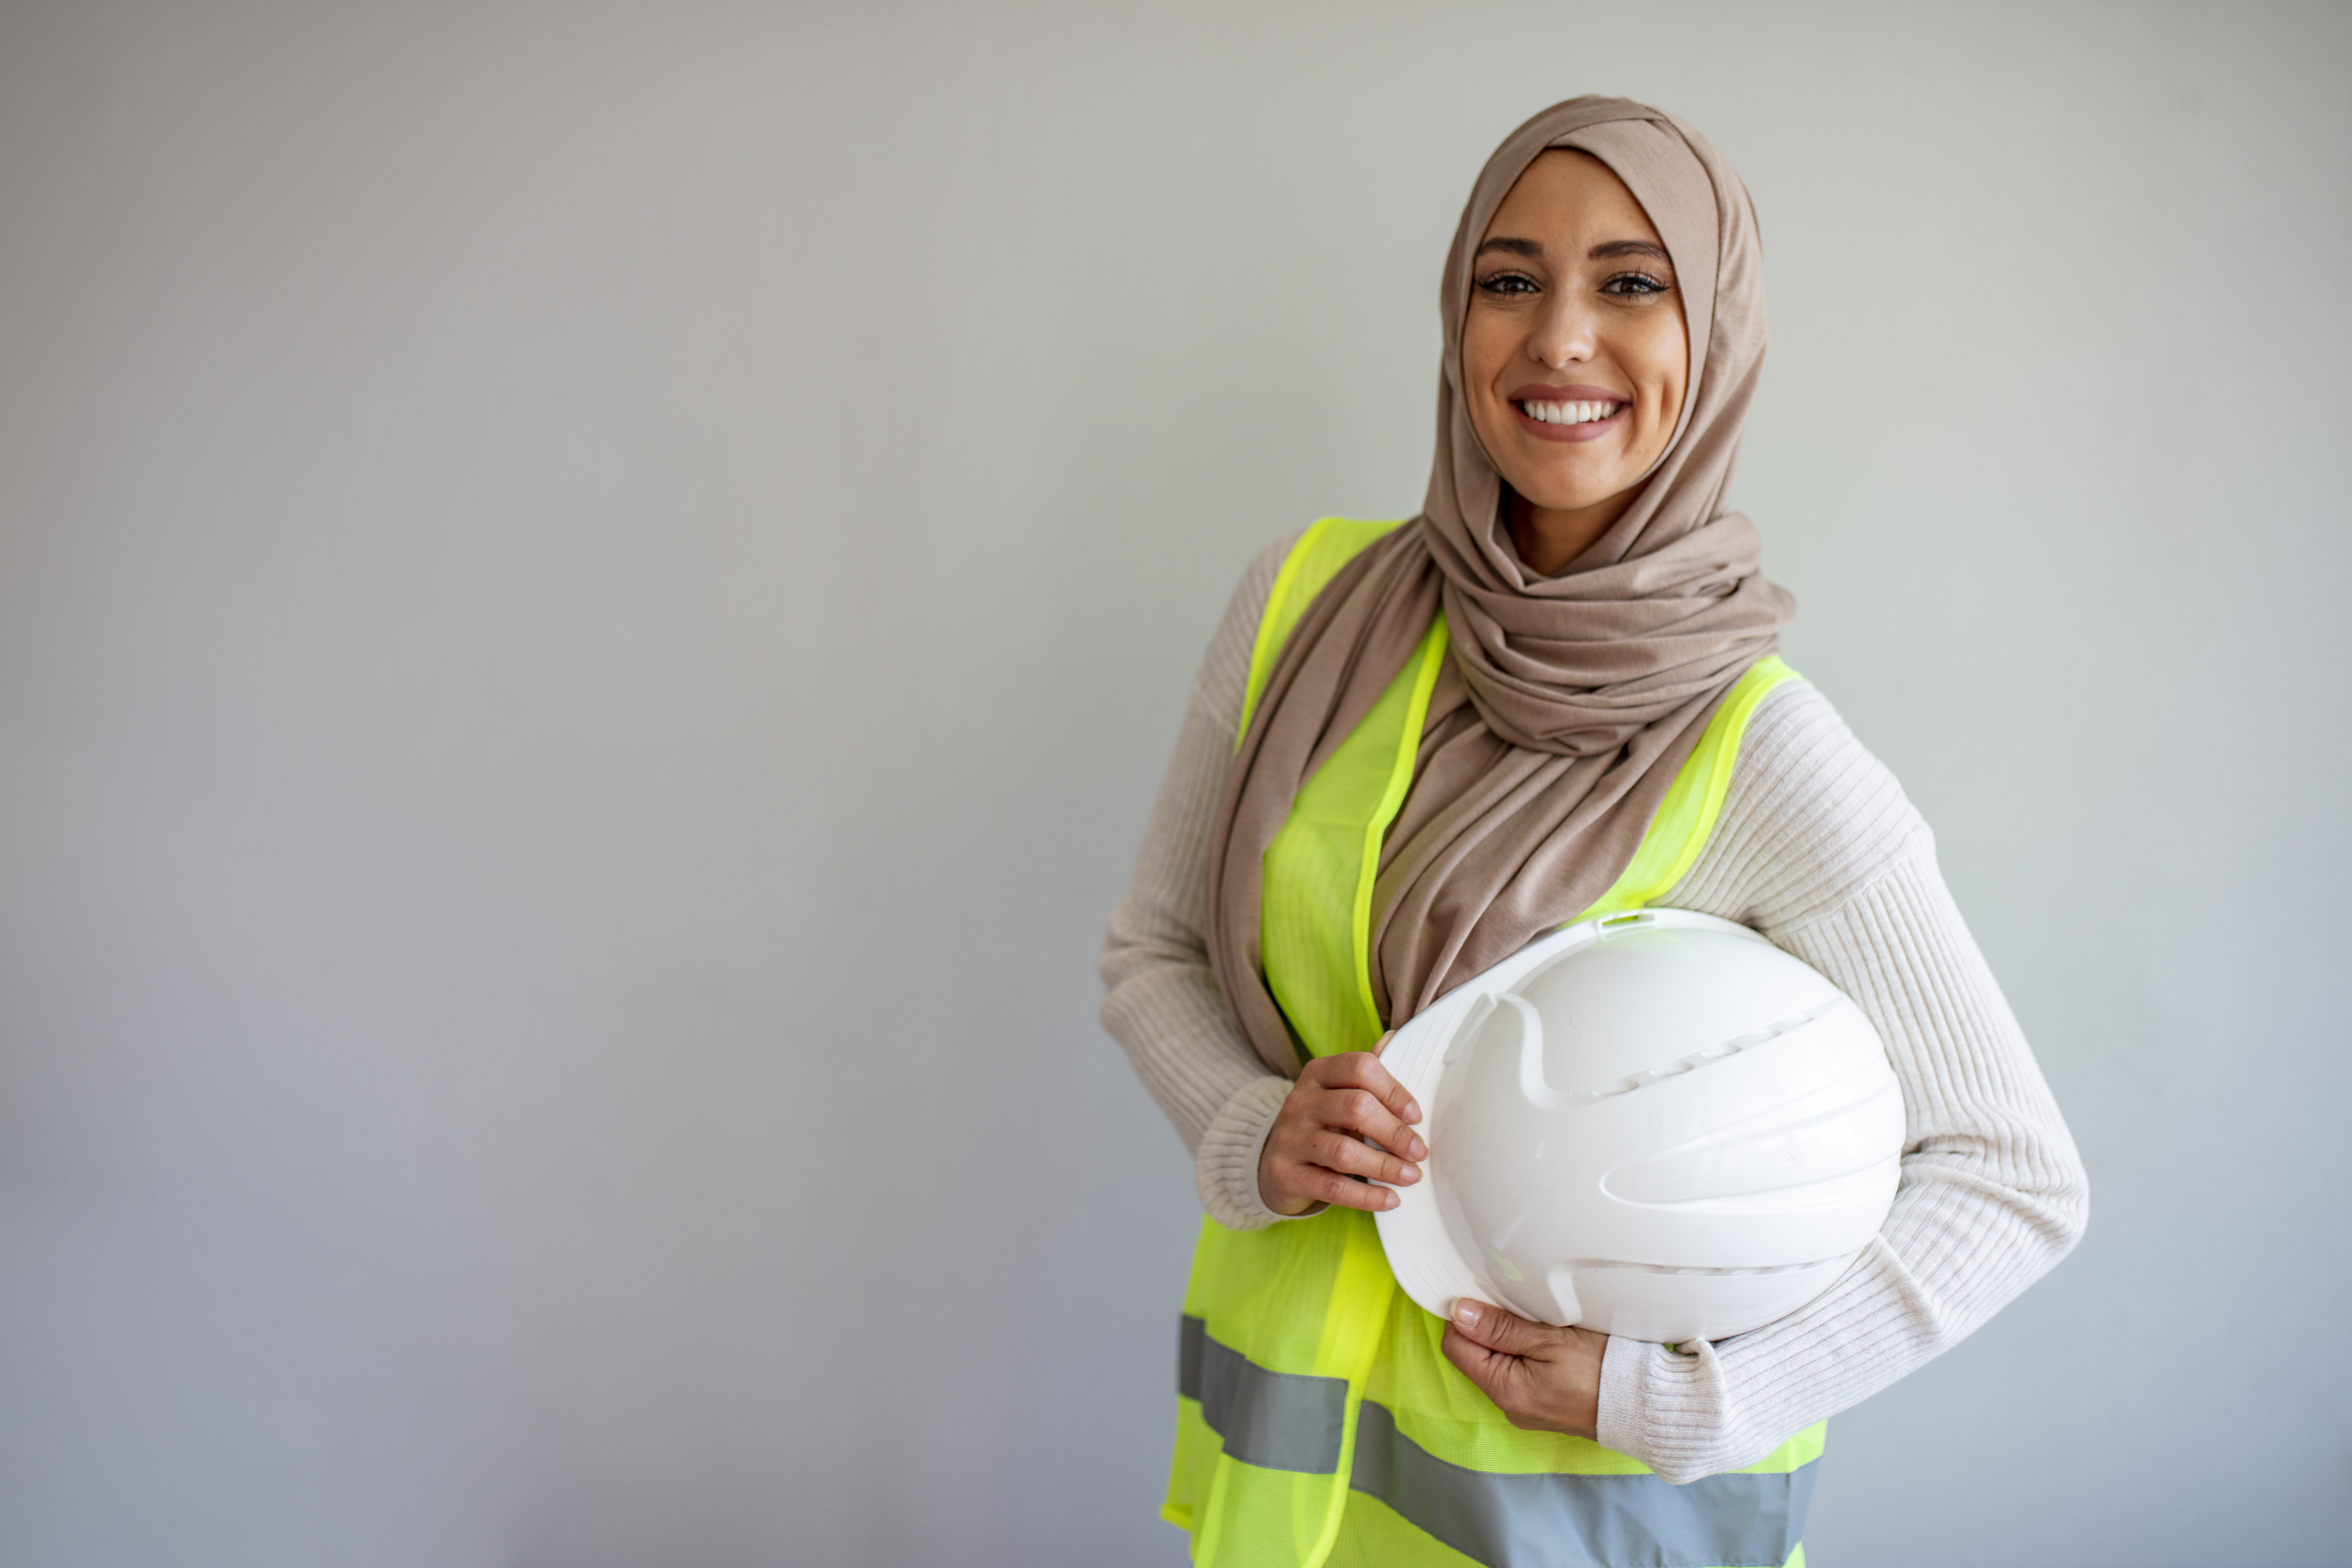 You woman smiling wearing a headscarf, holding a hard hat and wearing a safety vest